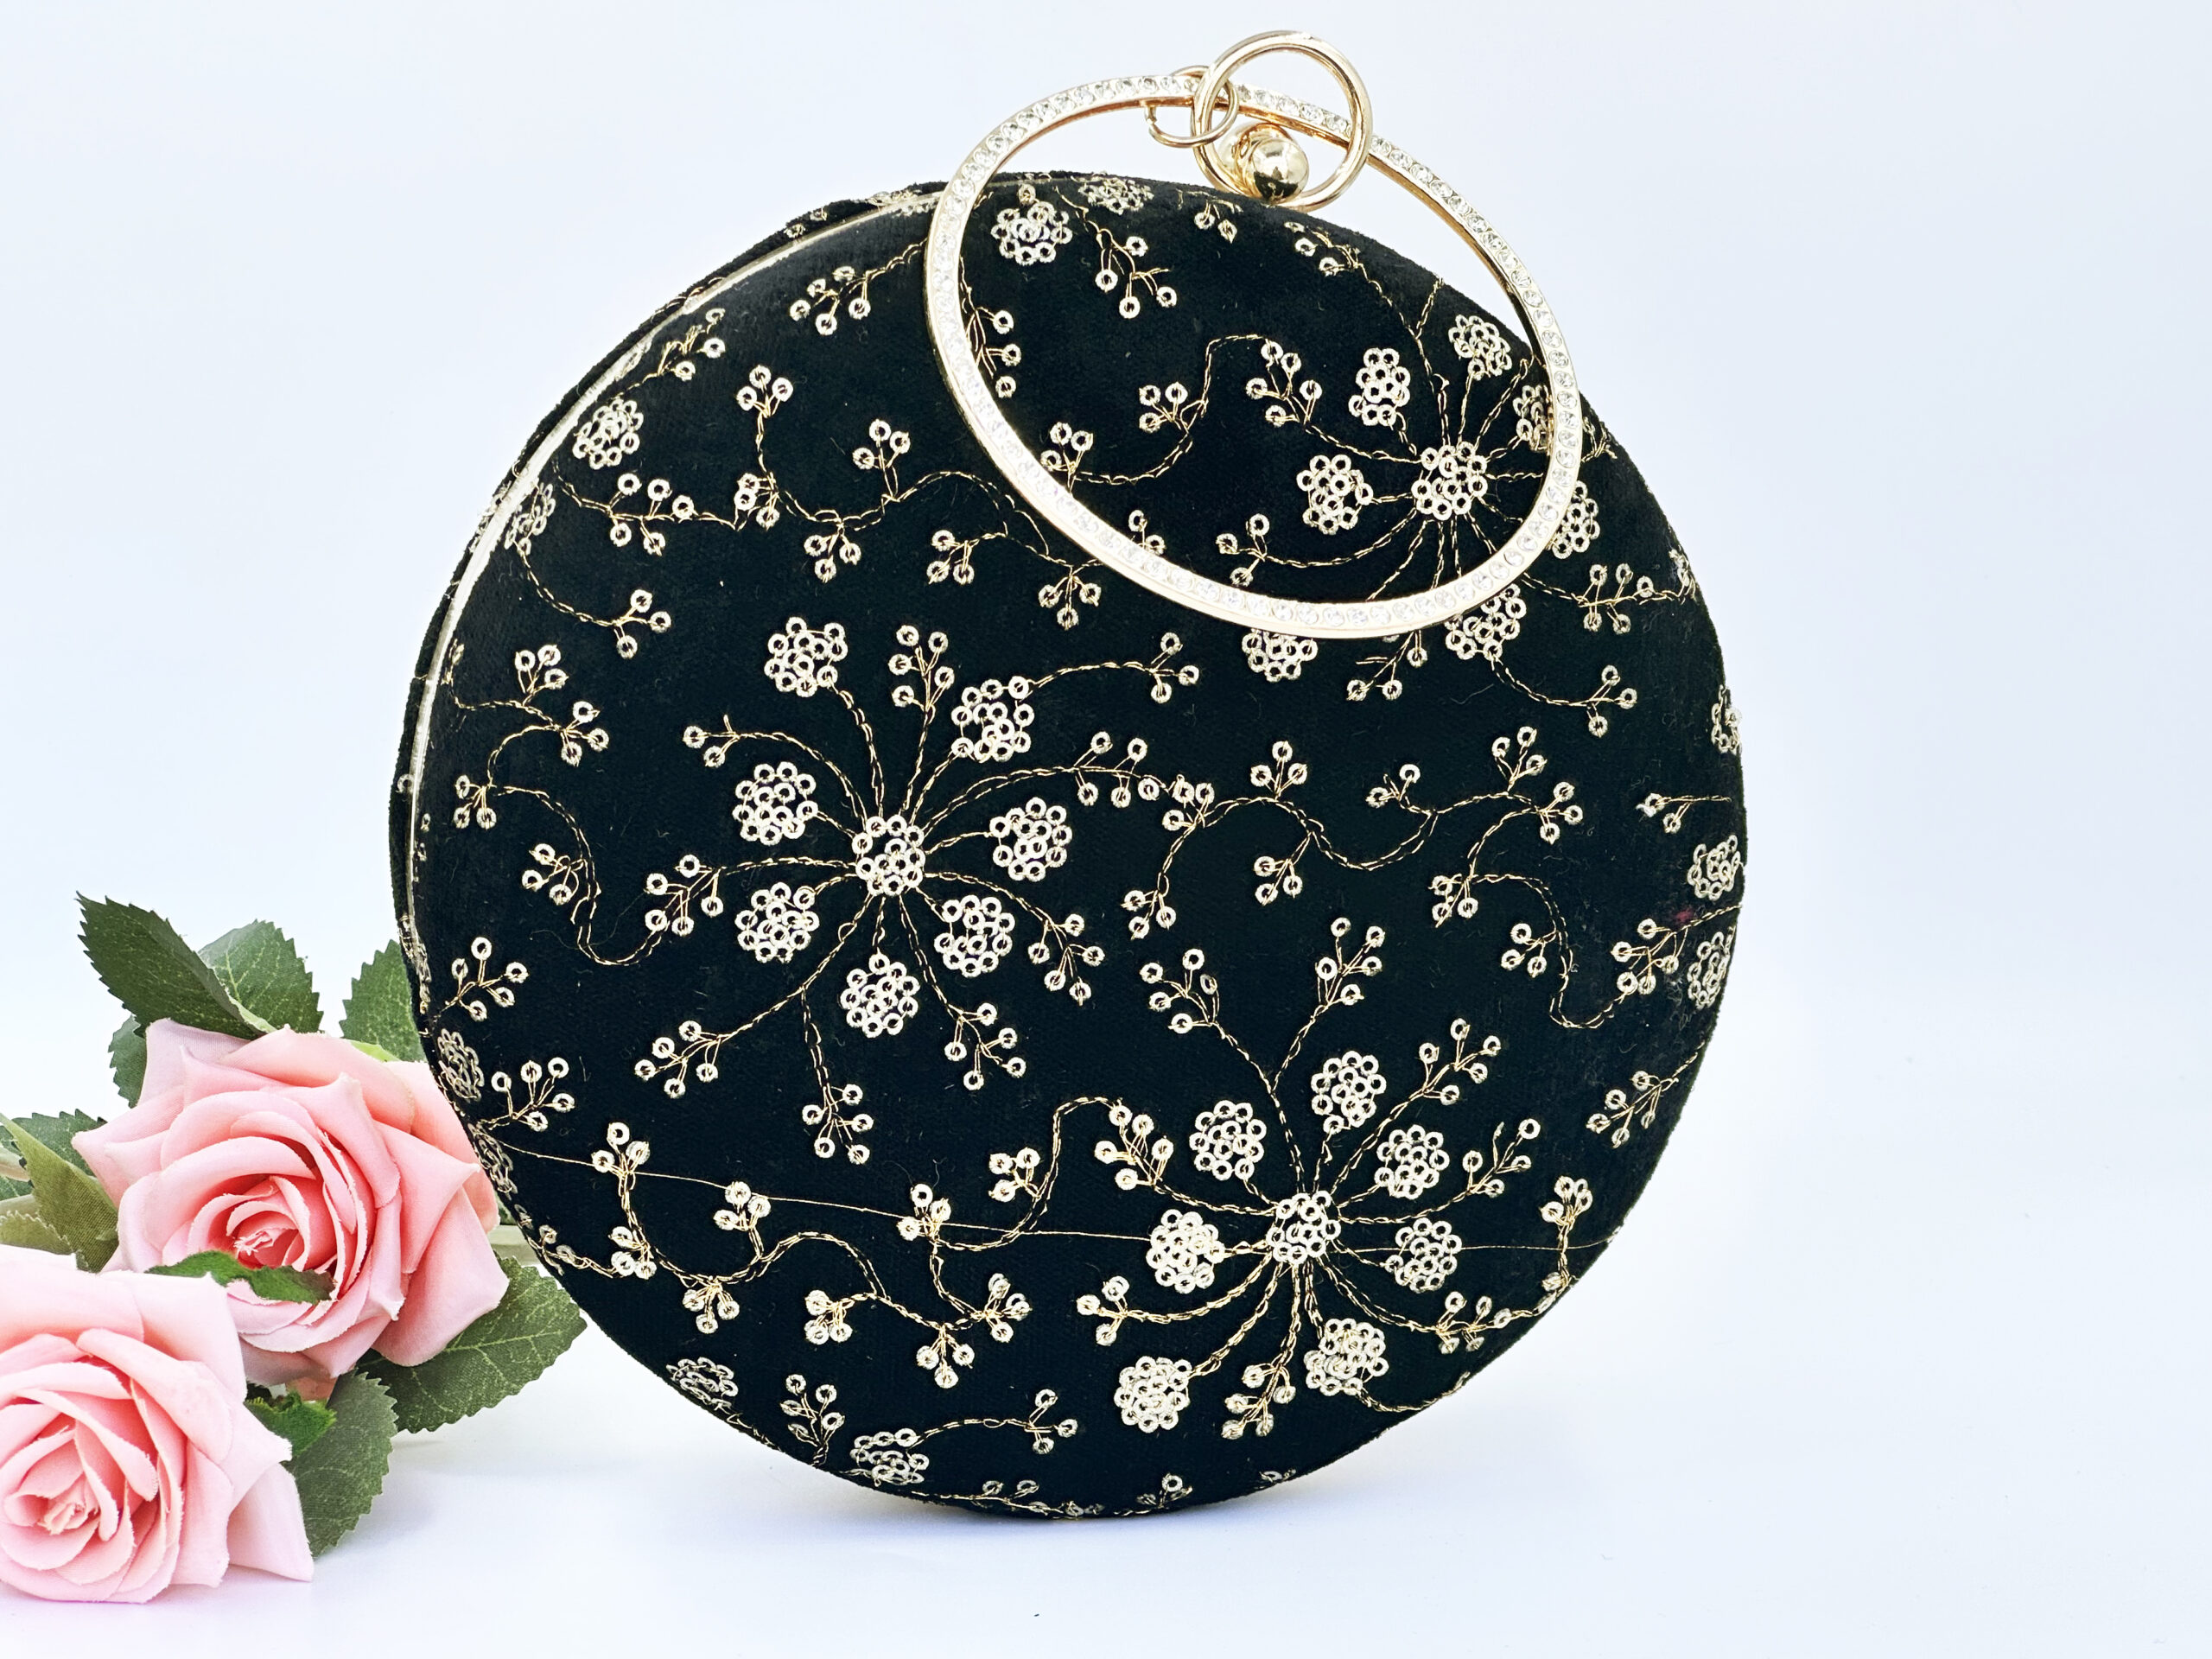 Aesthetic Black Sequined Round Party Clutch - nesaccessories.com